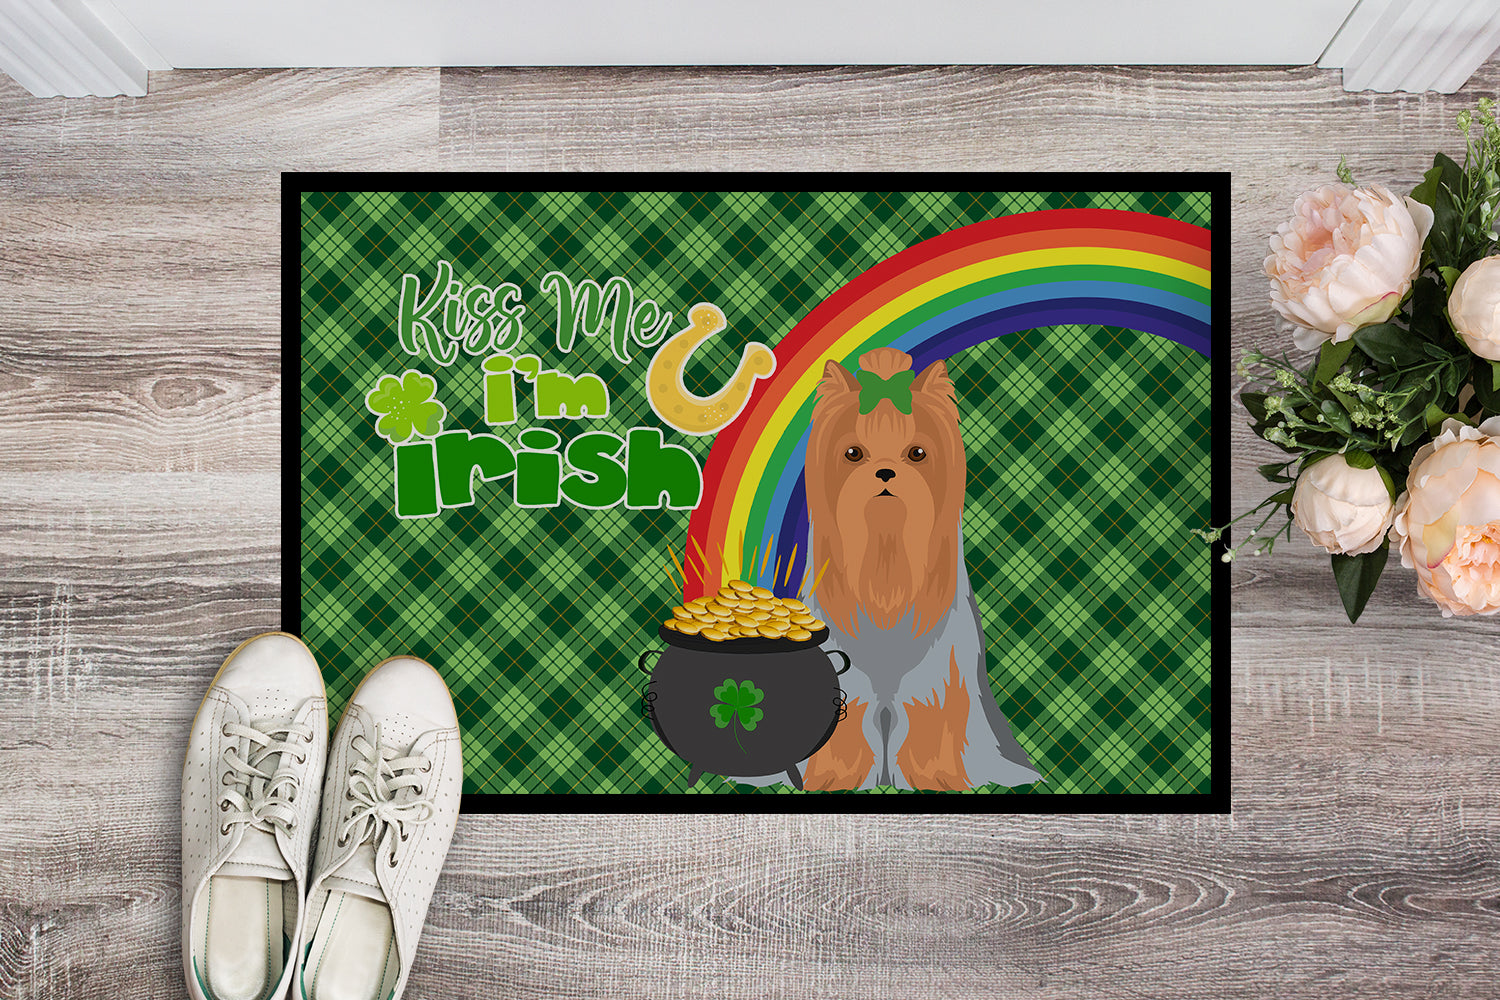 Buy this Blue and Tan Full Coat Yorkshire Terrier St. Patrick's Day Indoor or Outdoor Mat 24x36